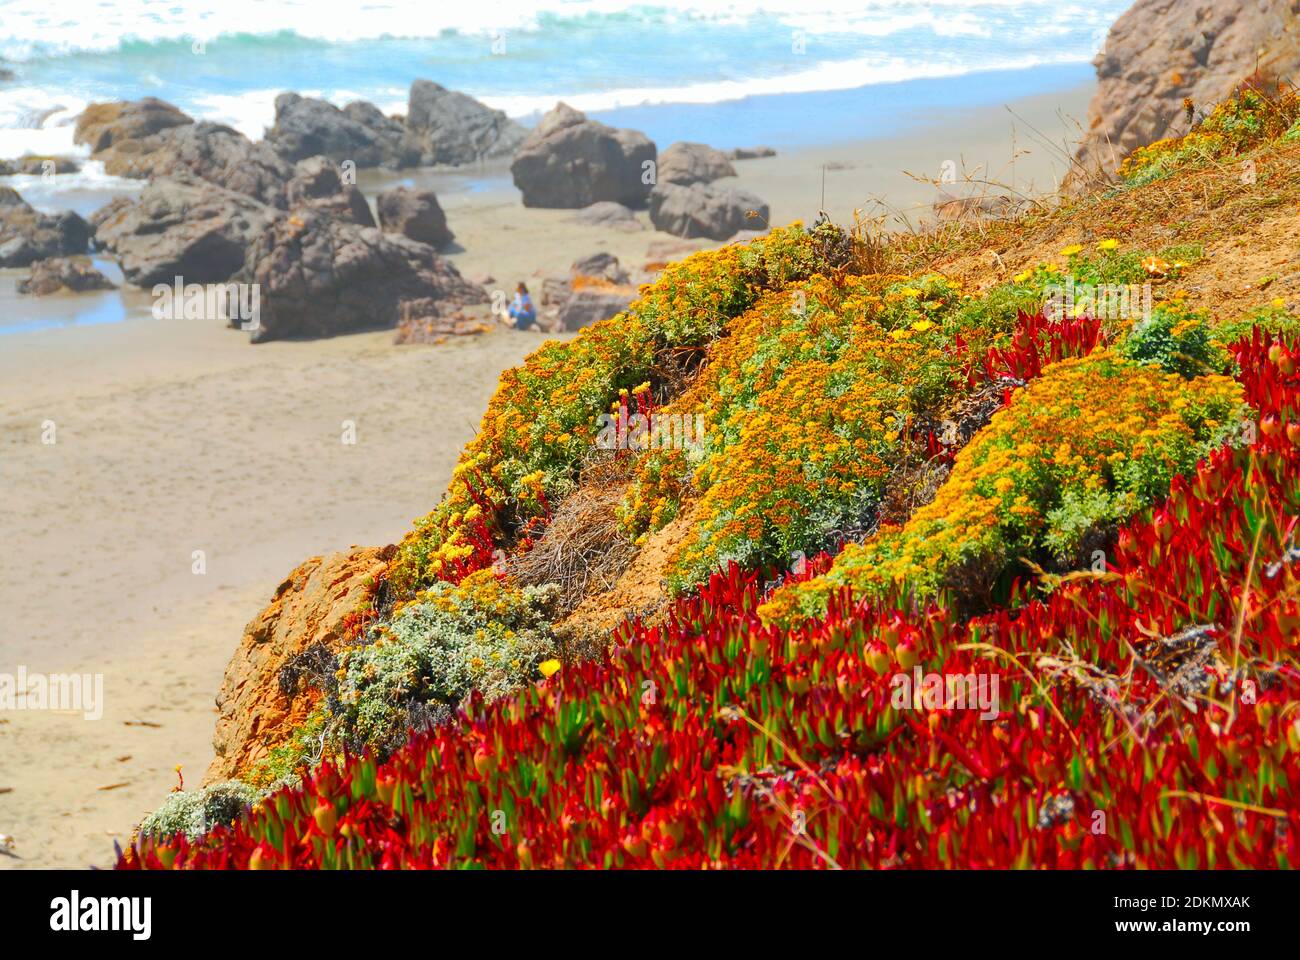 Wild flowers cover the hillside leading down to a beach with large rocks and sand, on the Pacific Ocean in Northern California, U.S.A.. Stock Photo